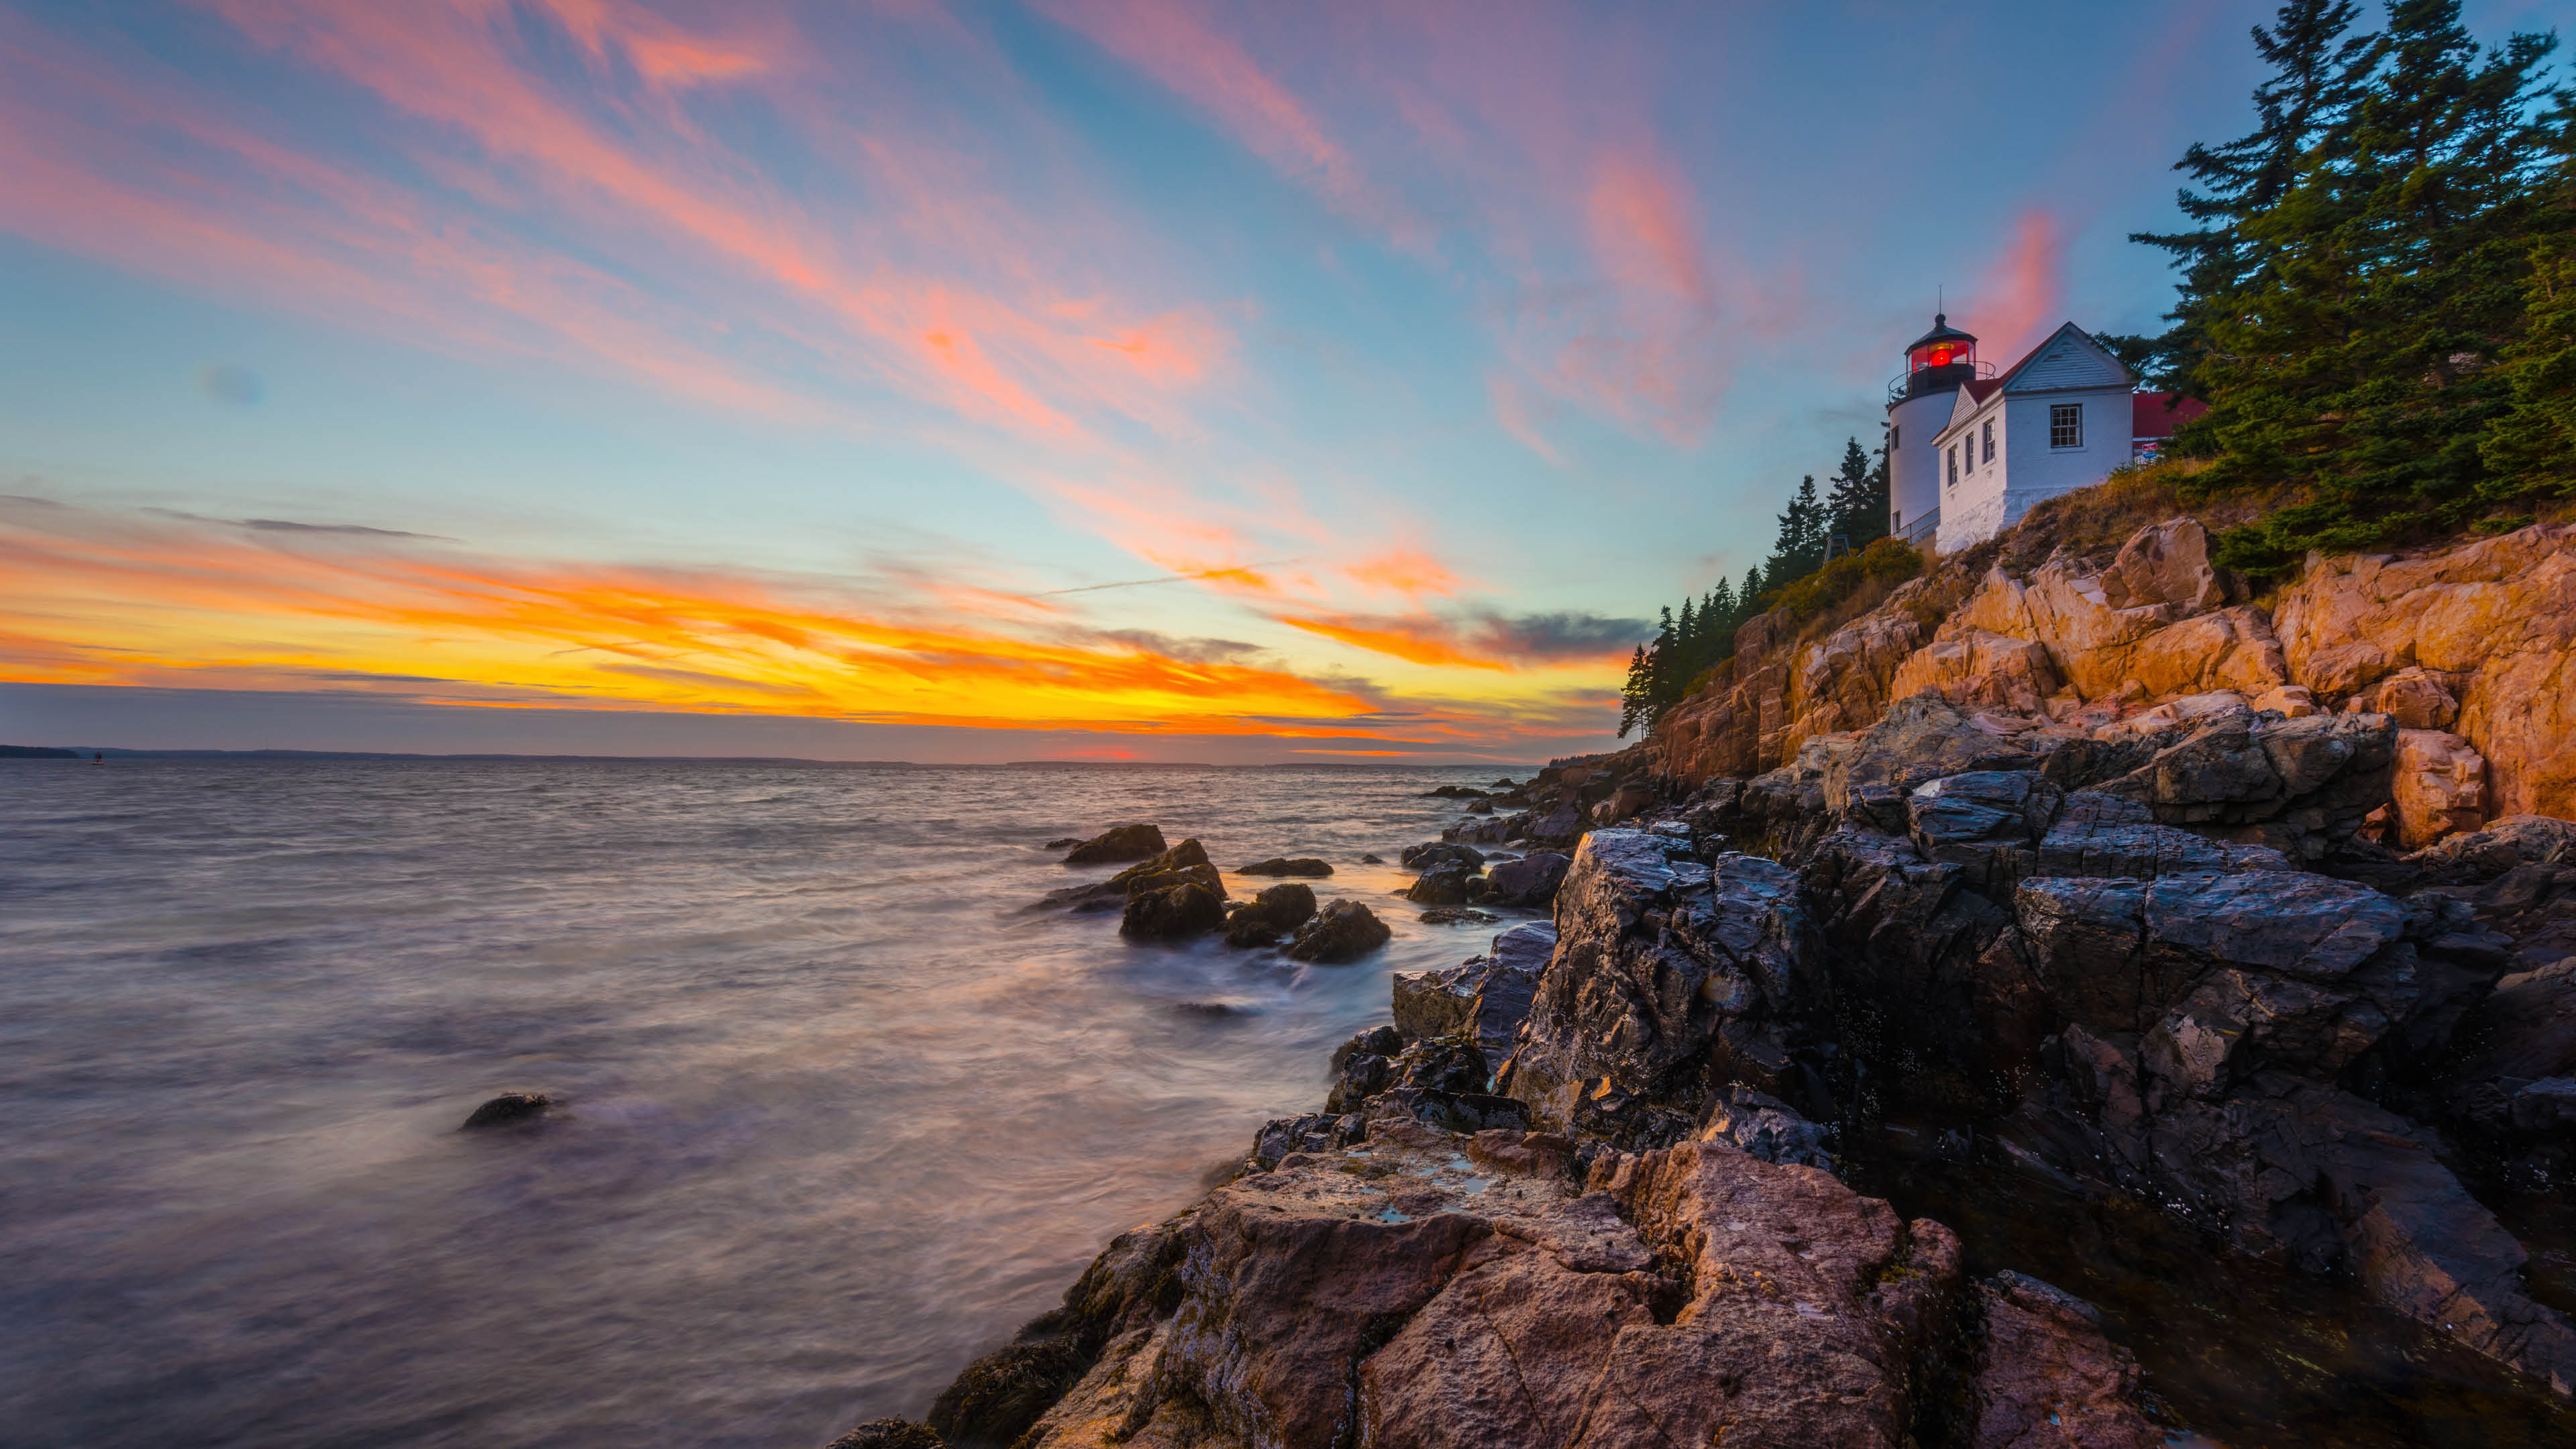 All-Inclusive Canada and New England Cruises